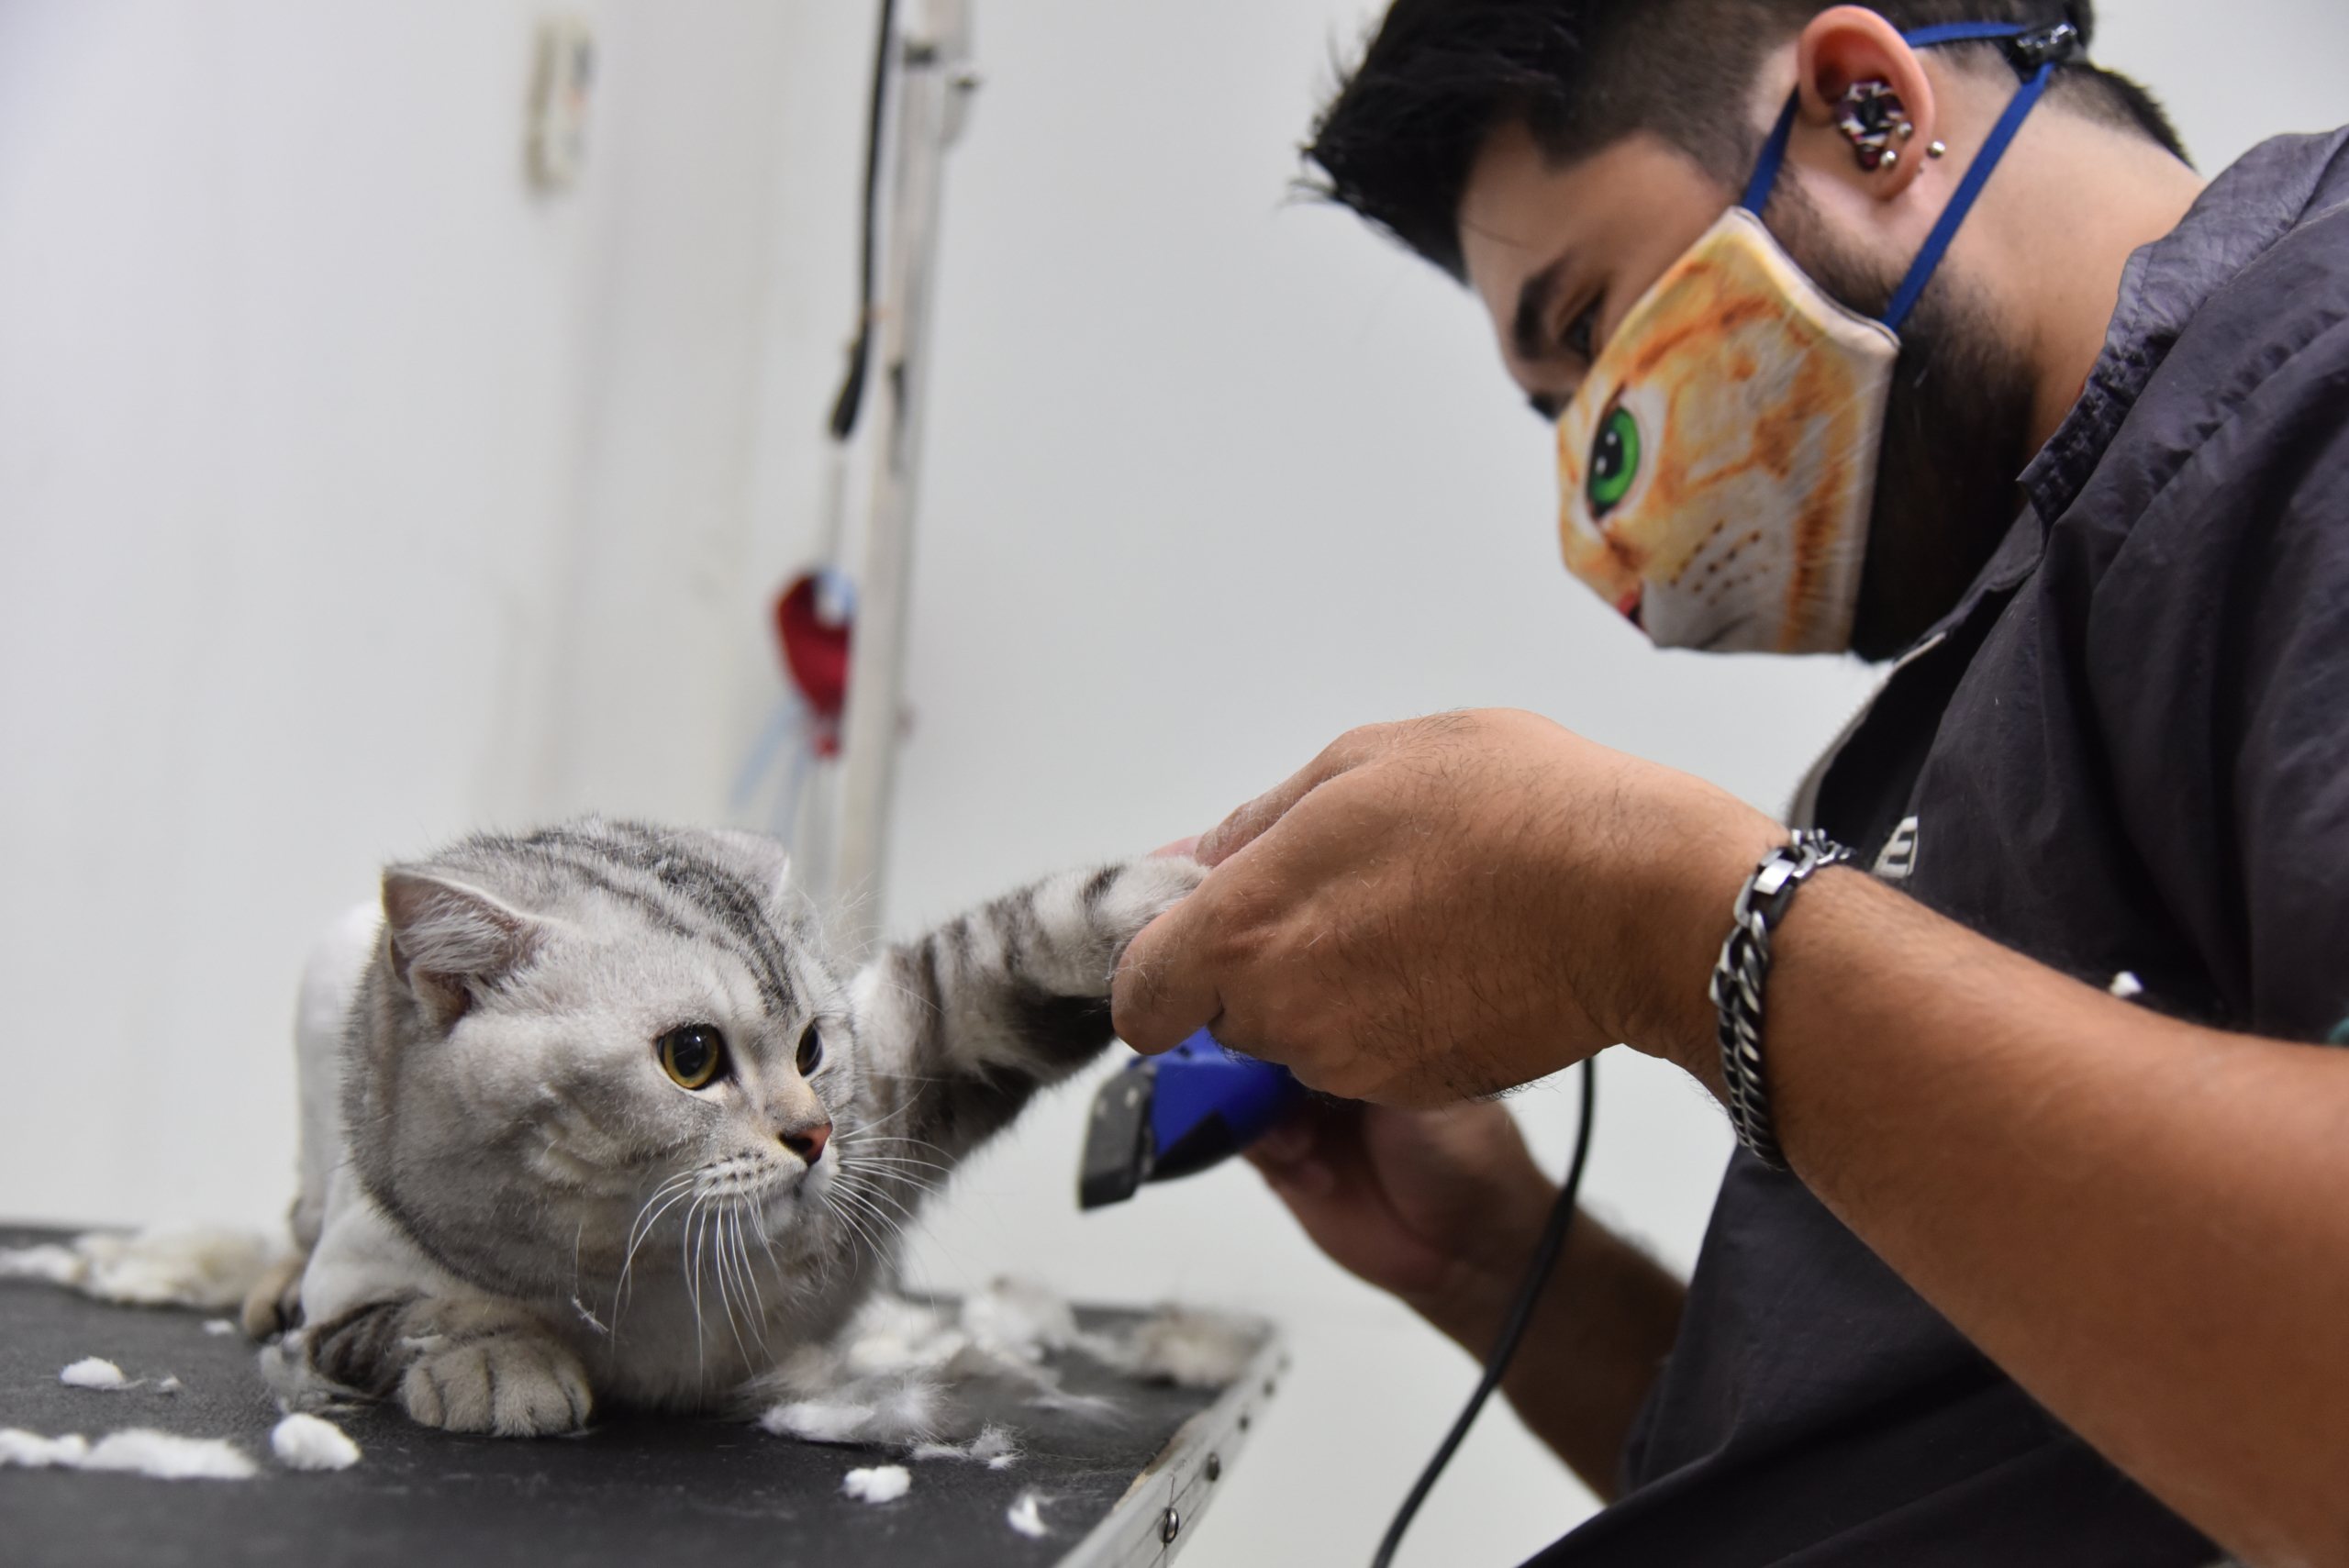 A cat receives a trim from a groomer whose wearing a face